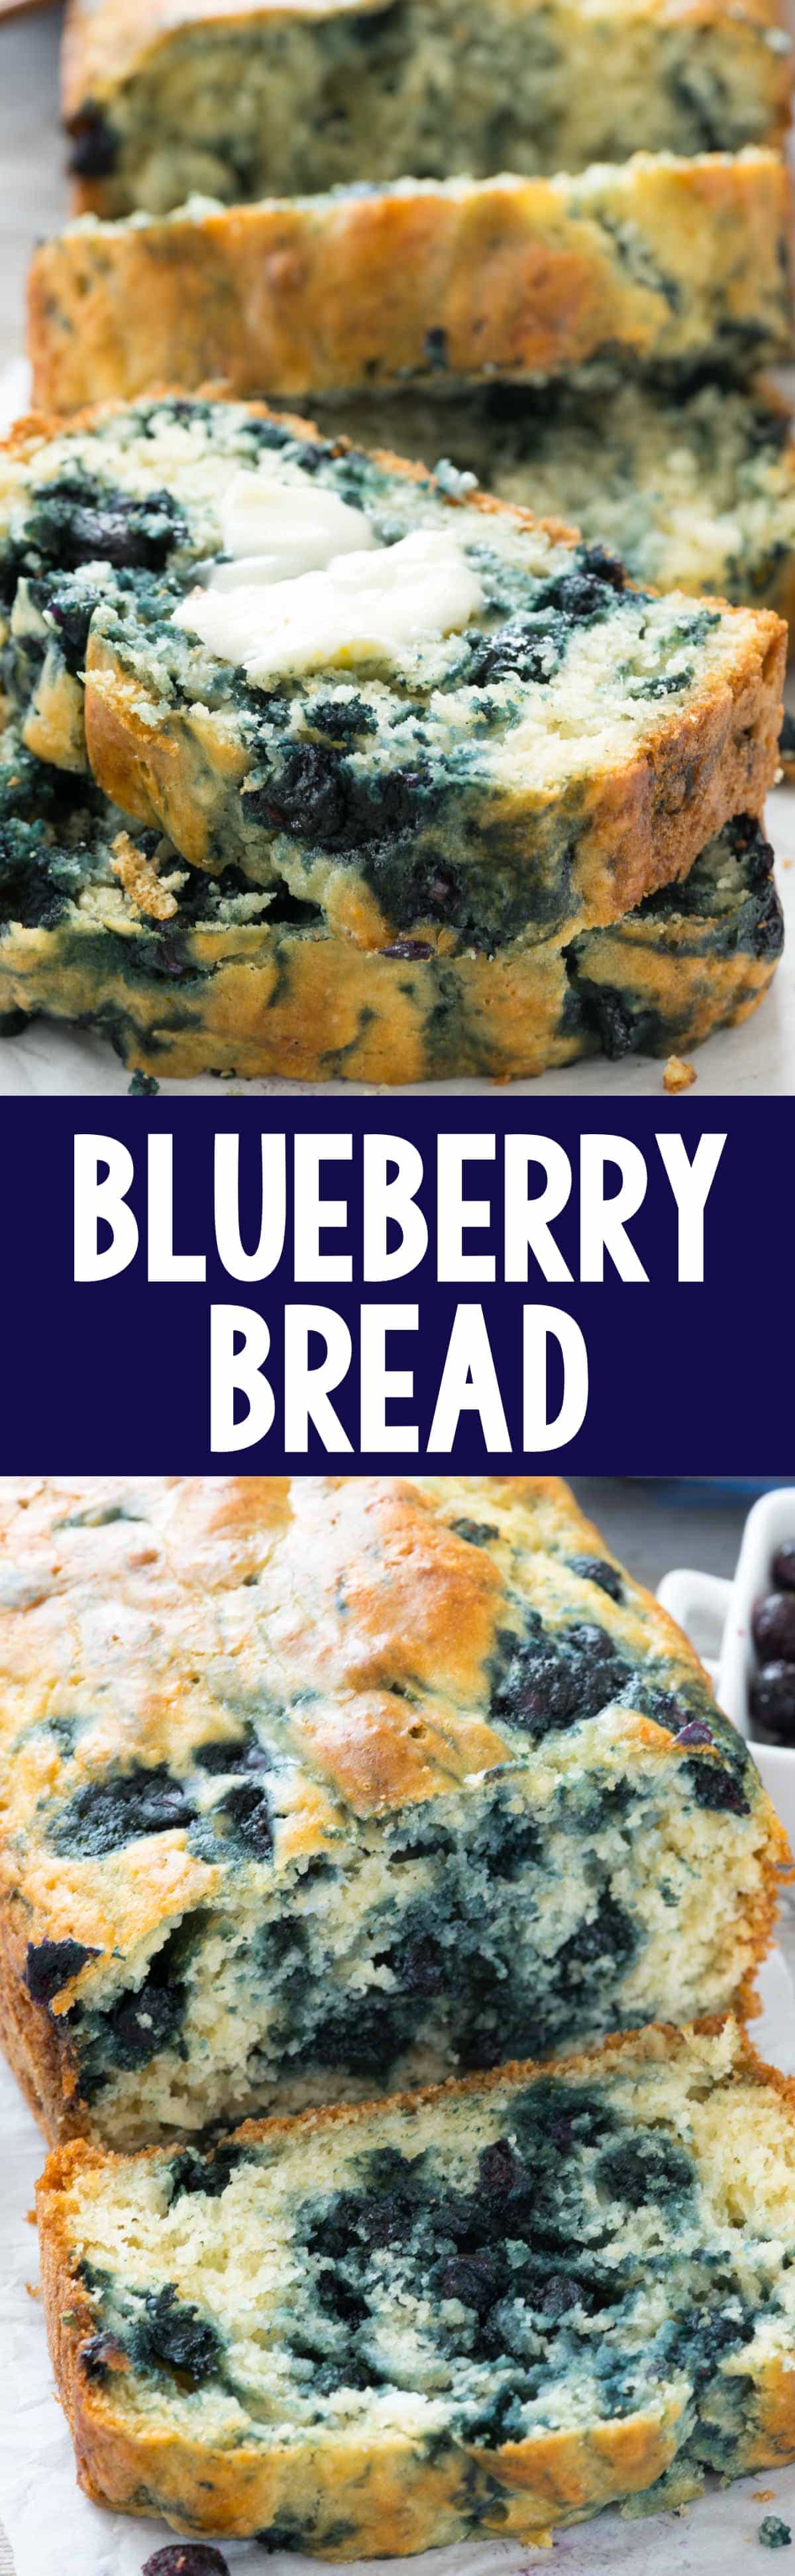 Blueberry Quick Bread - this easy bread recipe is full of blueberries and has less added sugar! It's the perfect breakfast; like a blueberry muffin but bread!